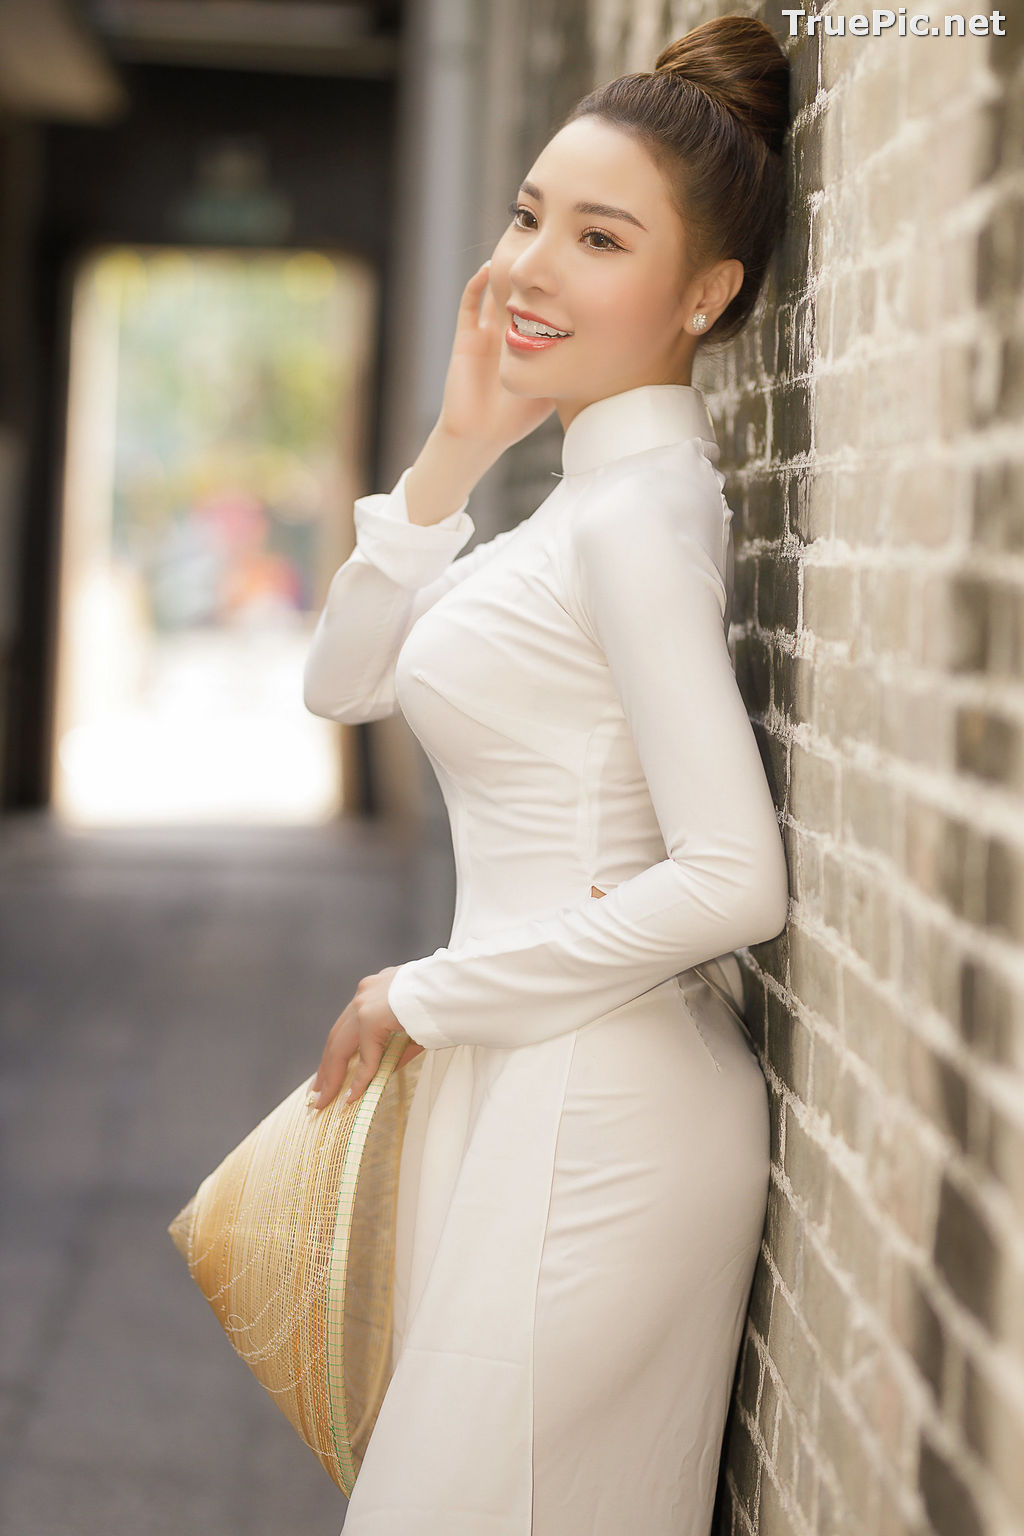 Image The Beauty of Vietnamese Girls with Traditional Dress (Ao Dai) #2 - TruePic.net - Picture-46